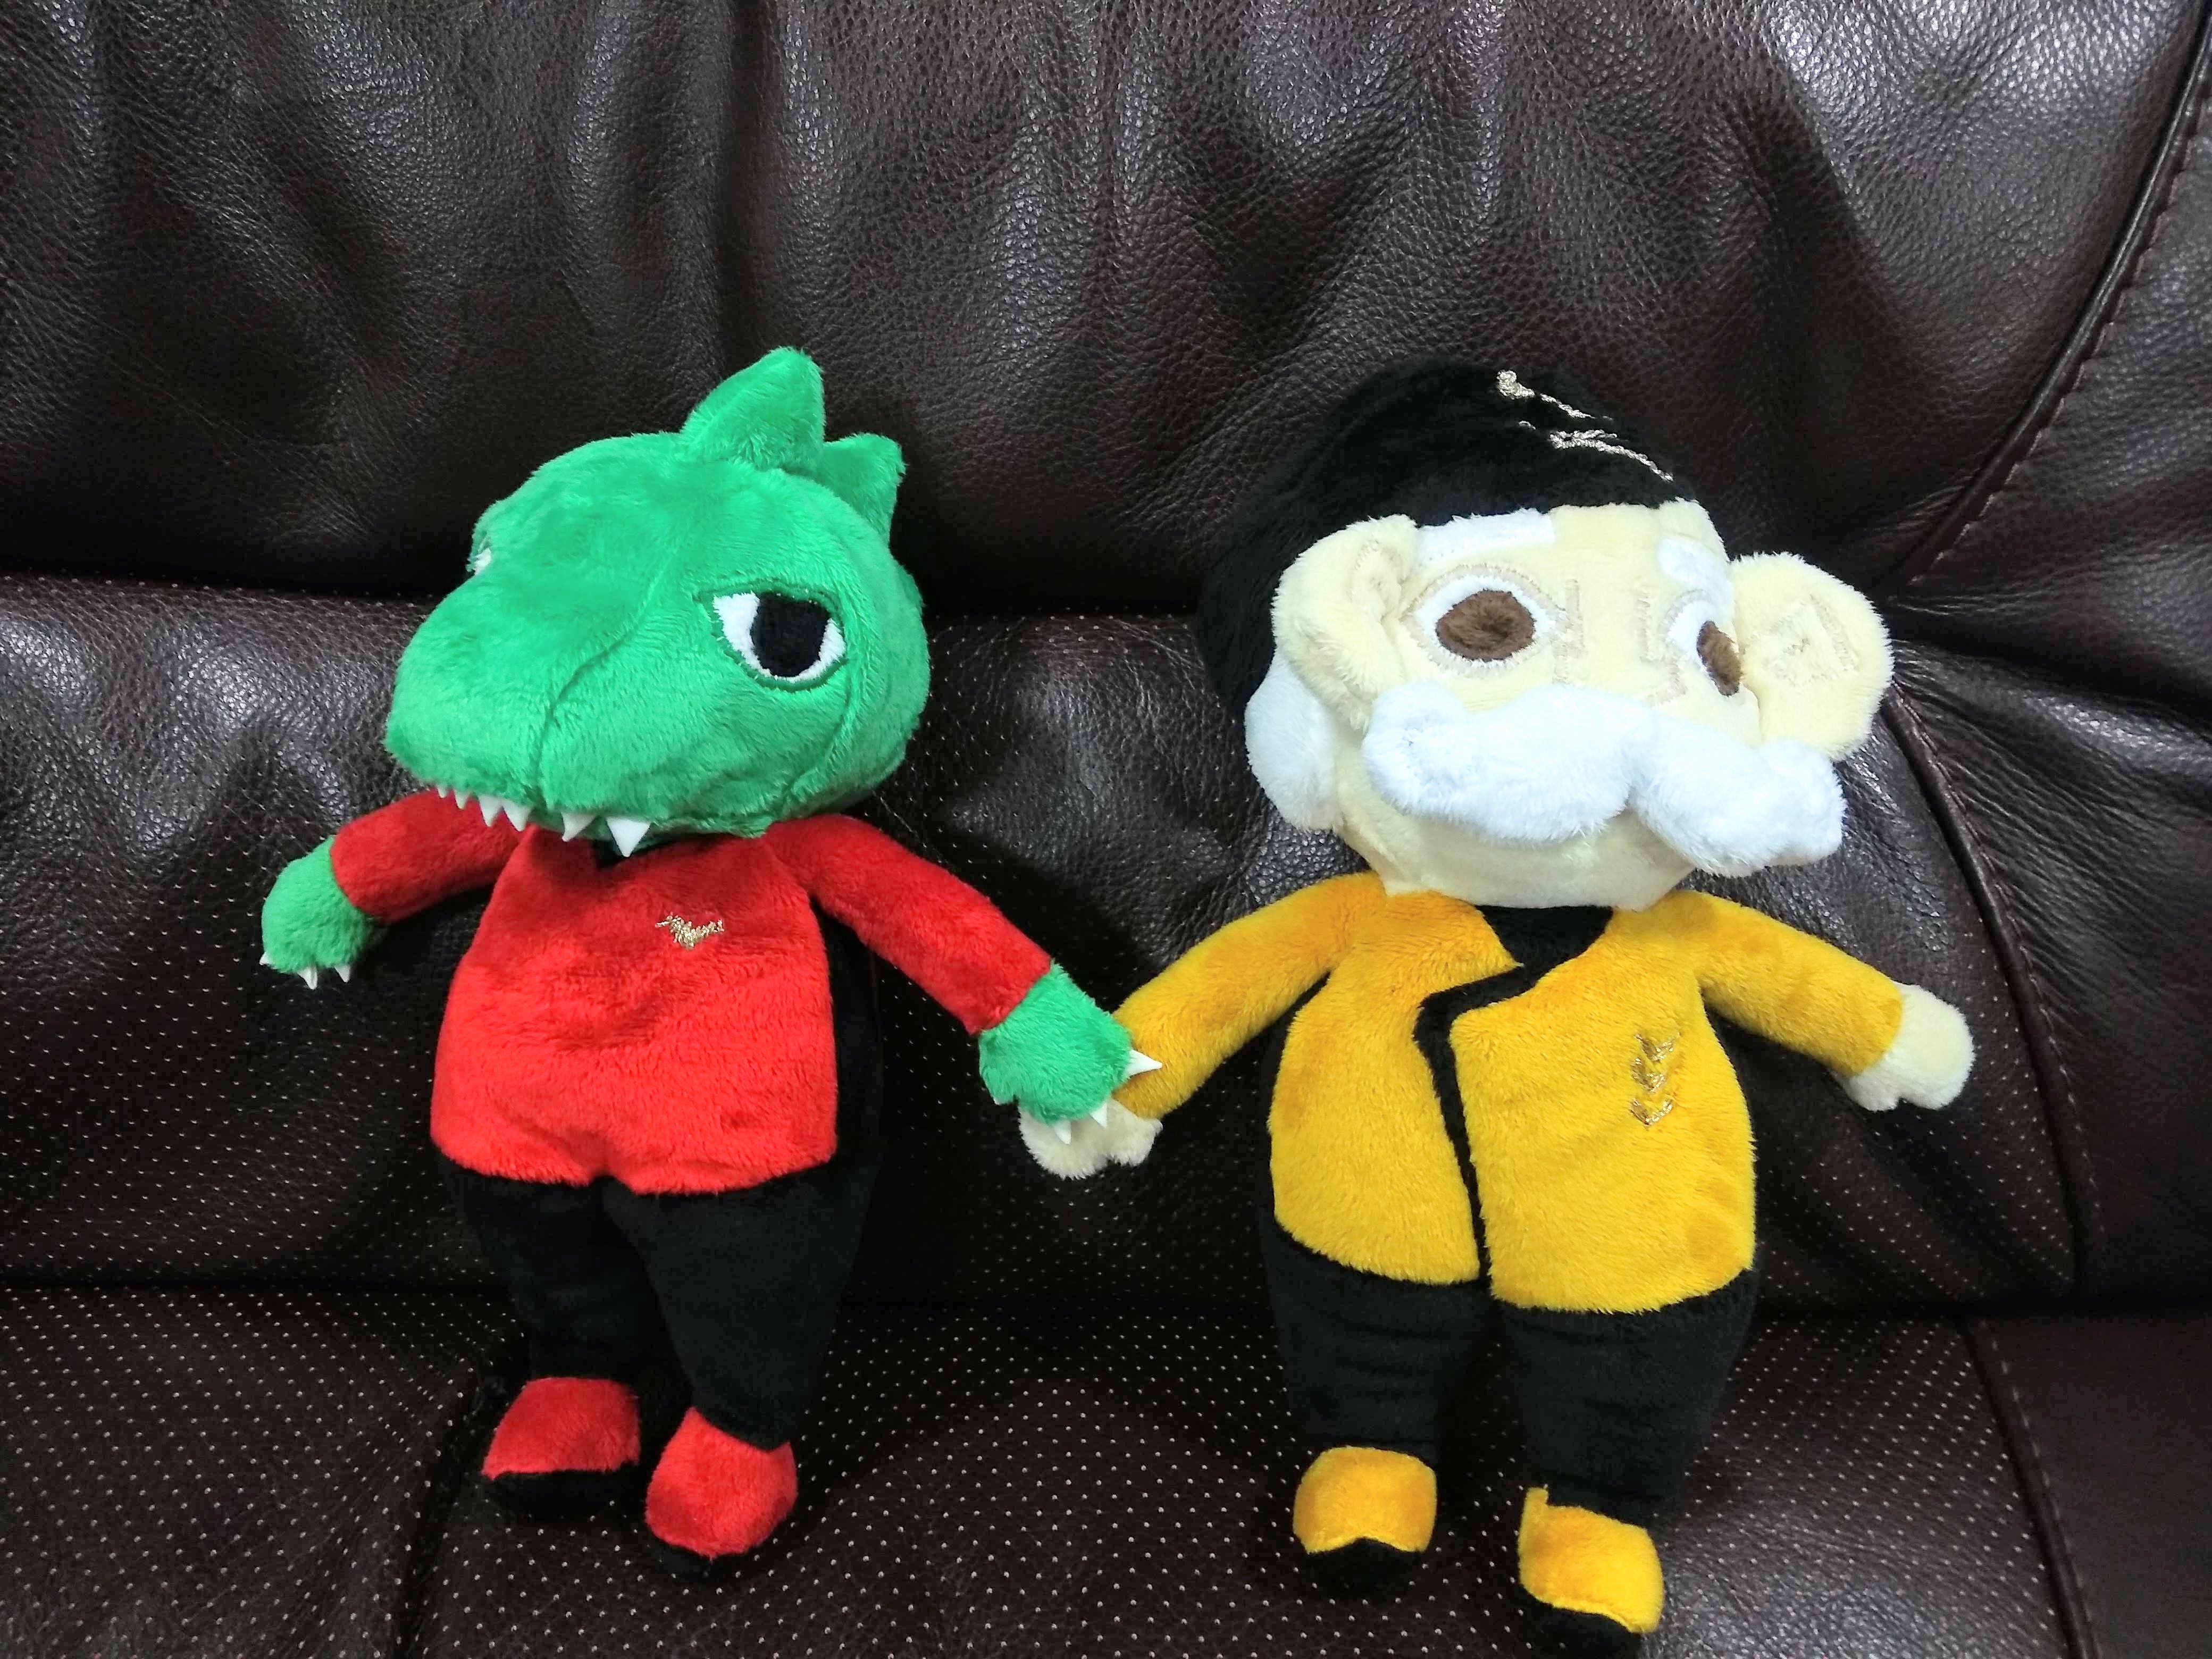 Two plushies on a leather sofa, both in 'Catastronauts' uniforms. In yellow and black is Sarge with a black hat, pale skin and white hair and large moustache. In red is a dinosaur-like green lizard with sharp teeth and ridges on his head.